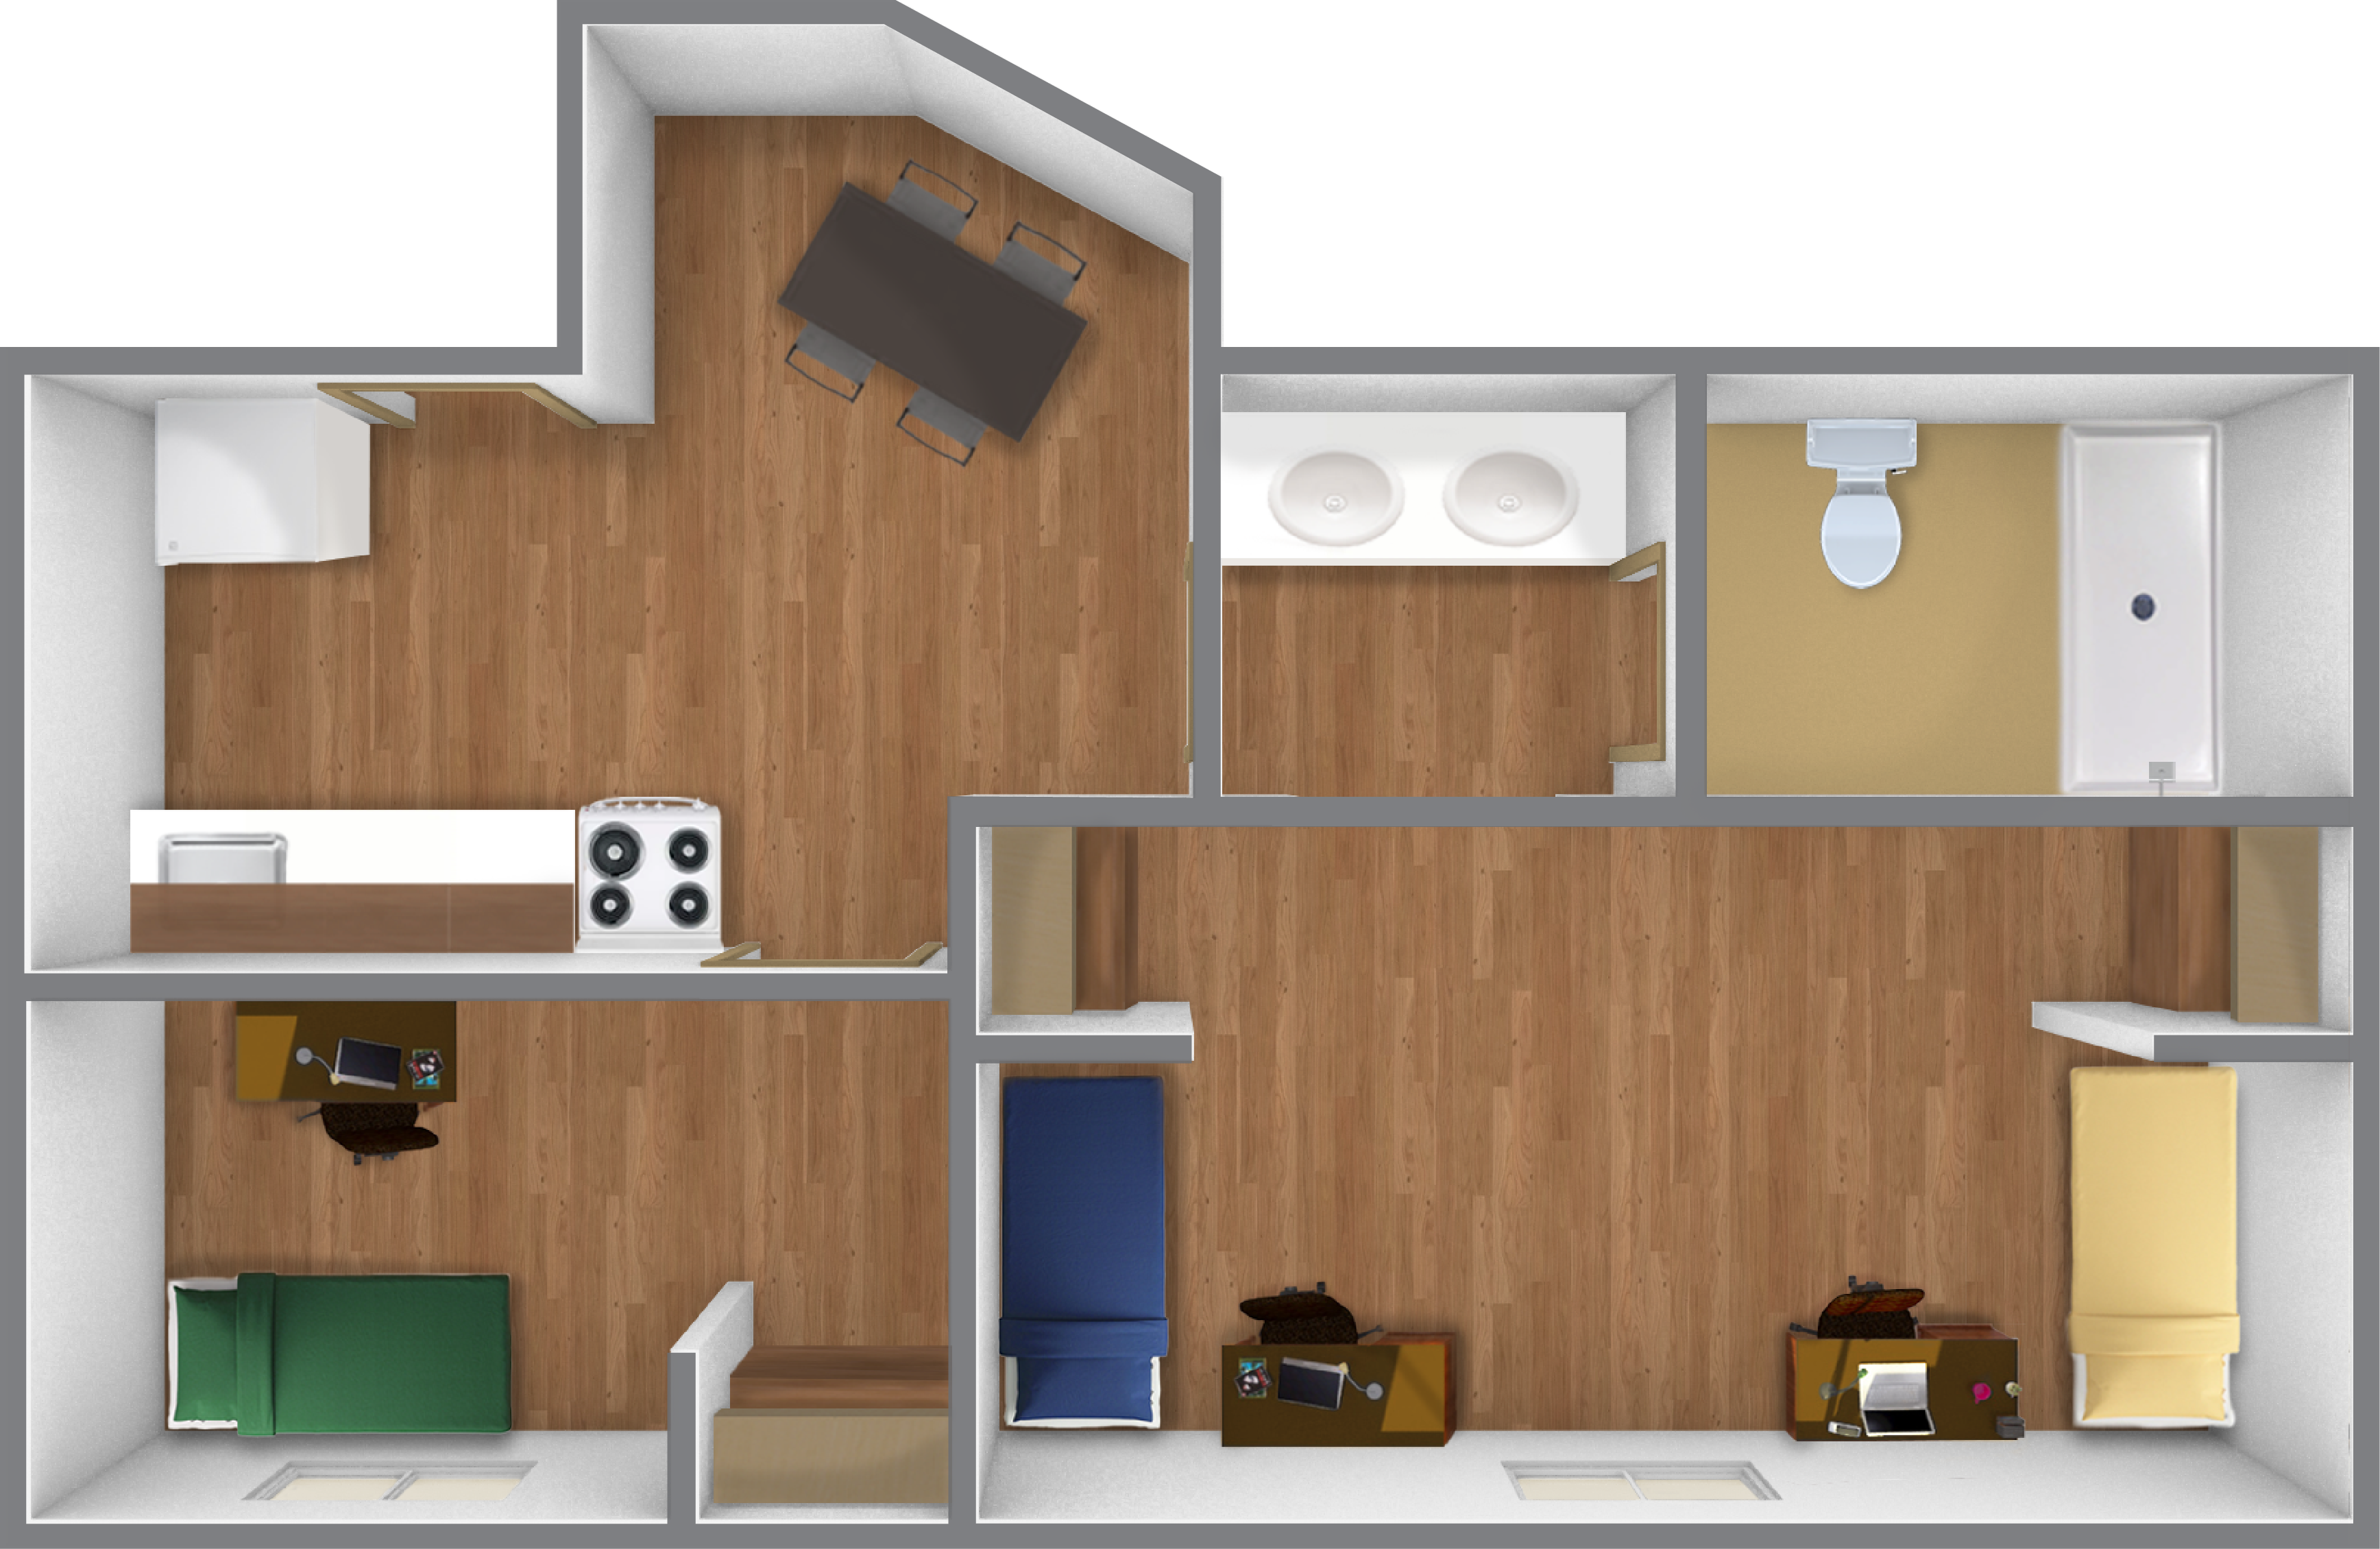 ua-floor-plan-shared-2-and-1-private